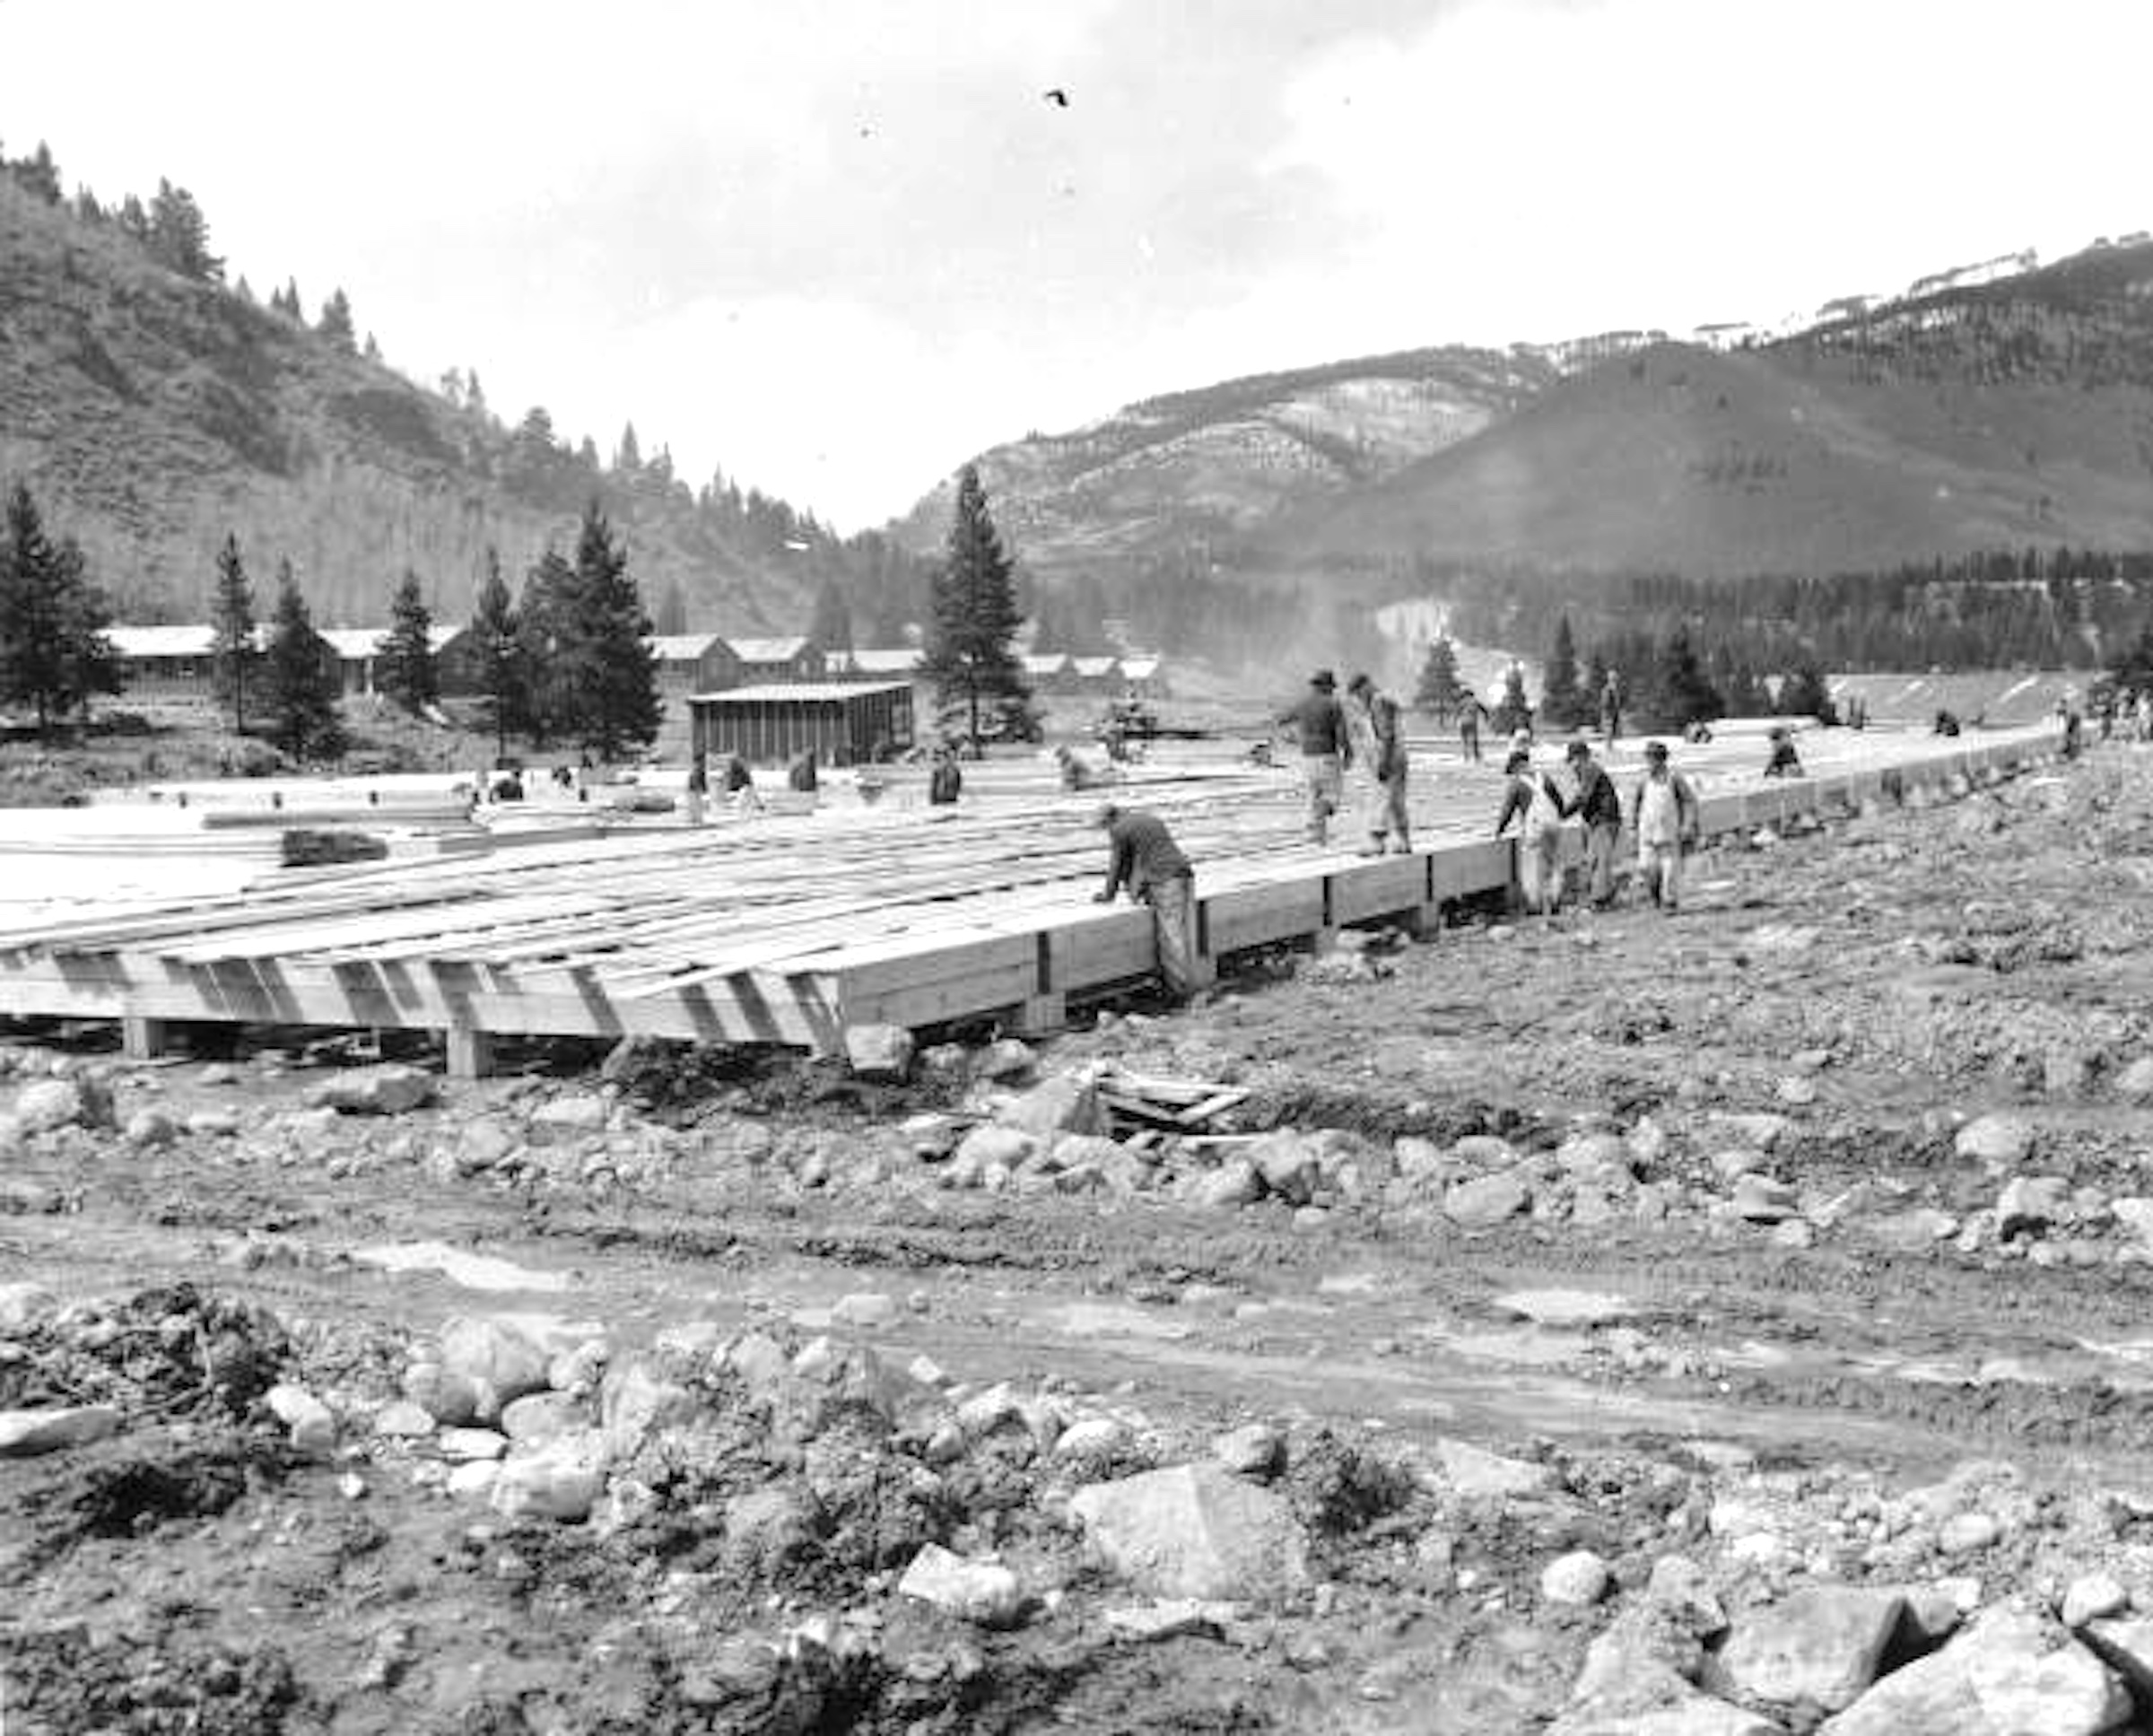 Workers constructing a structure in Camp Hale.